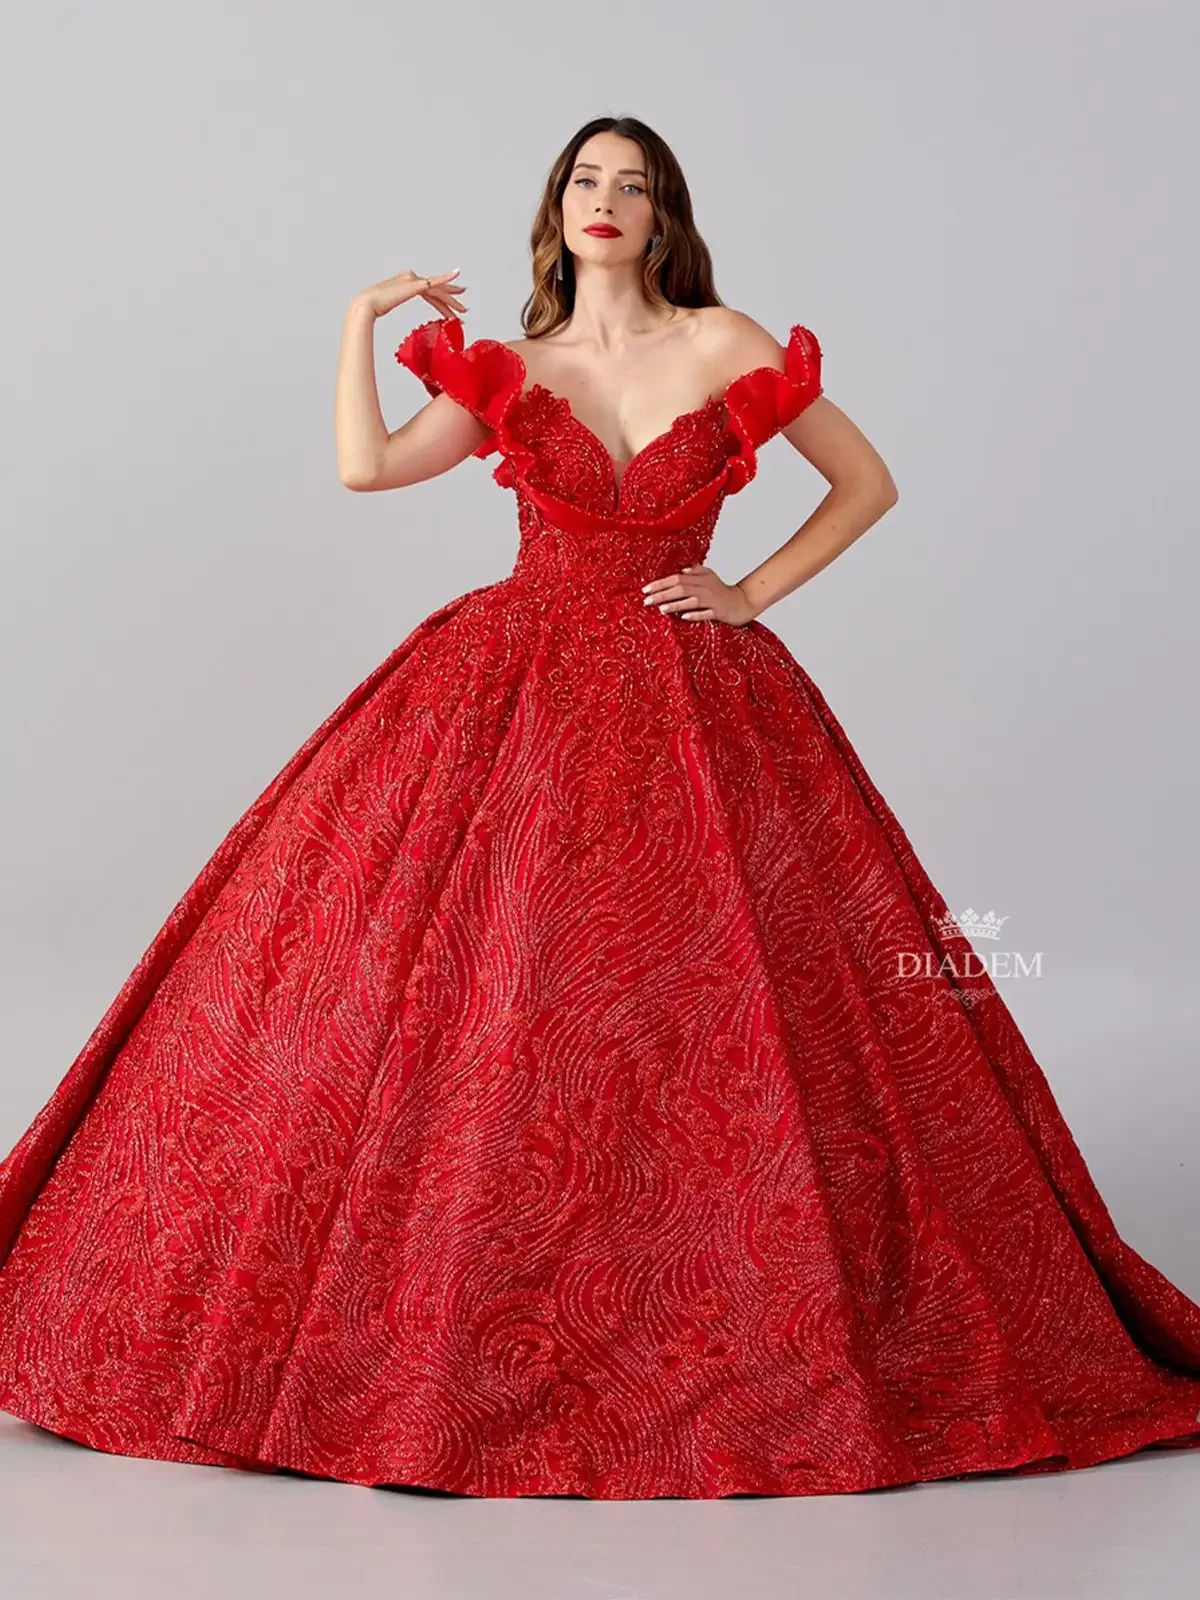 Red Ball Gown Adorned With Floral Design Beads And Laces